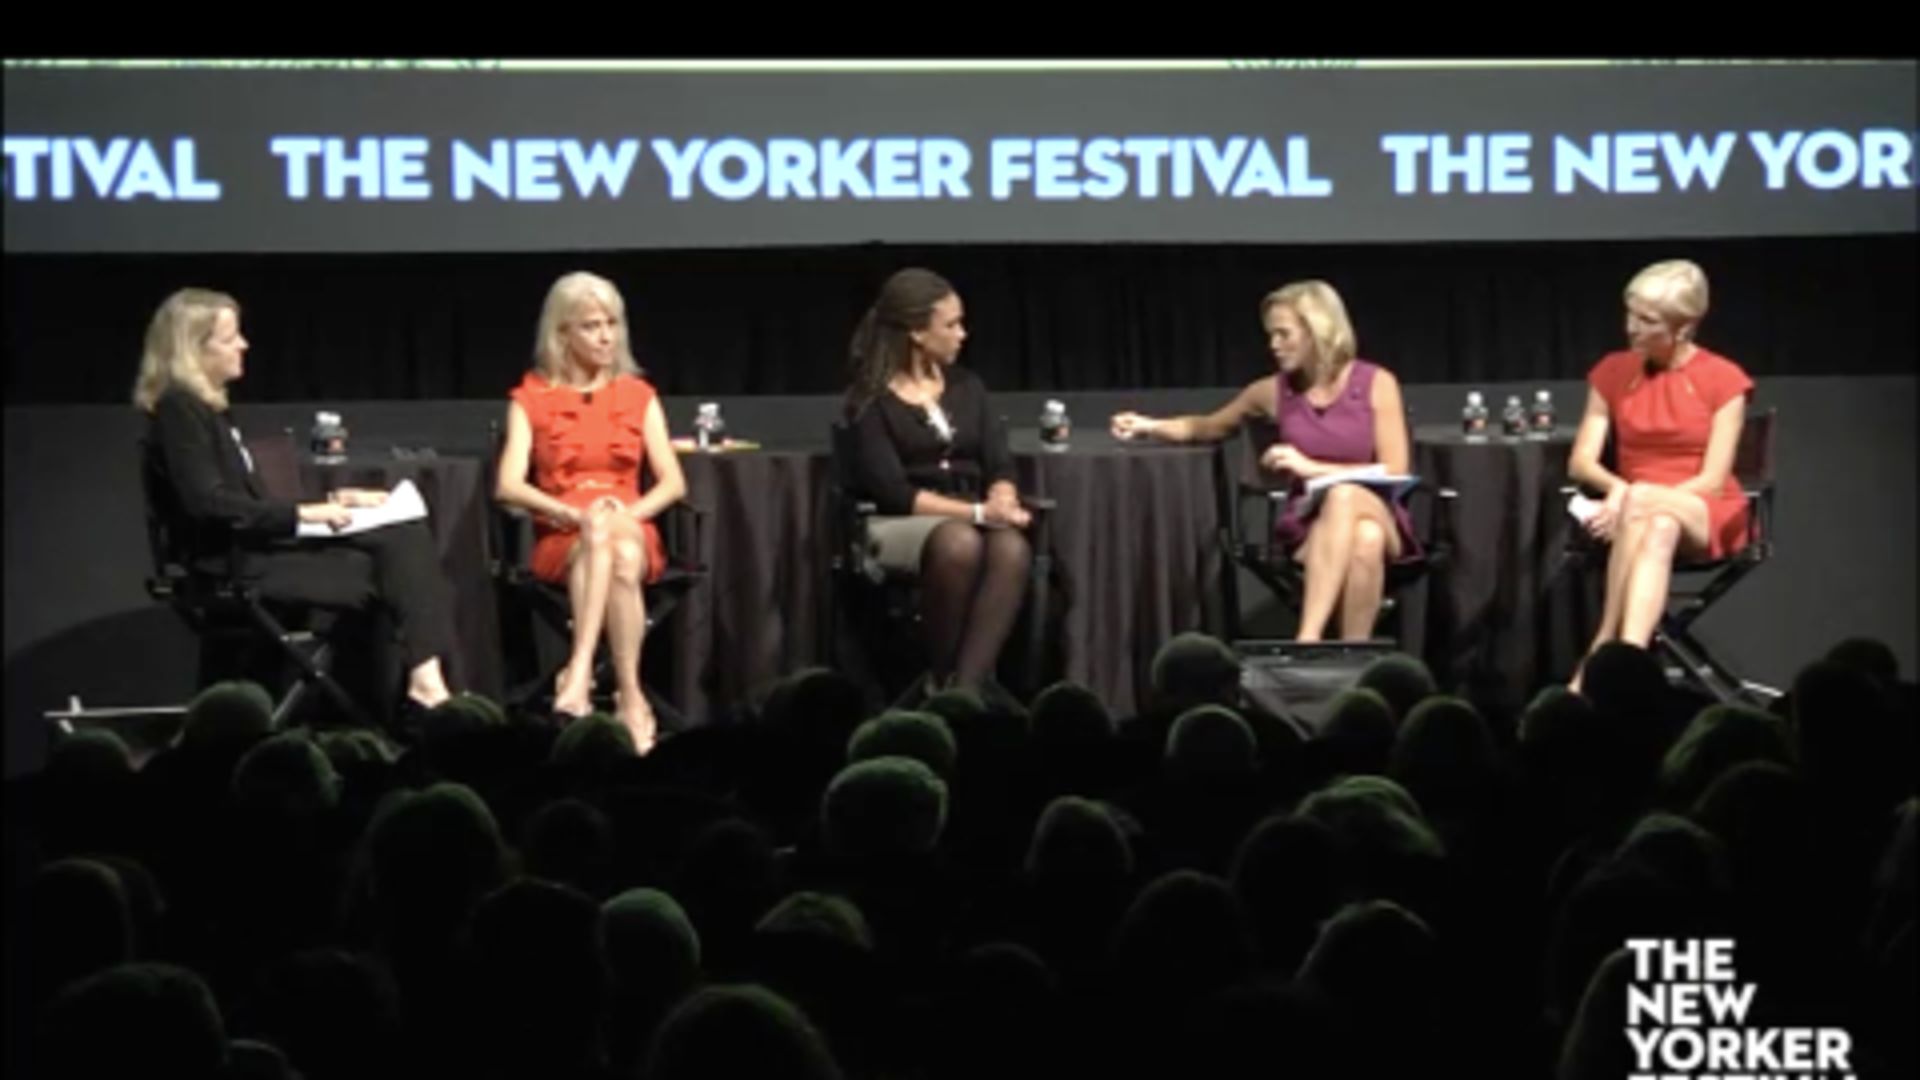 Watch The Fifty-One Per Cent New Yorker Festival The New Yorker image